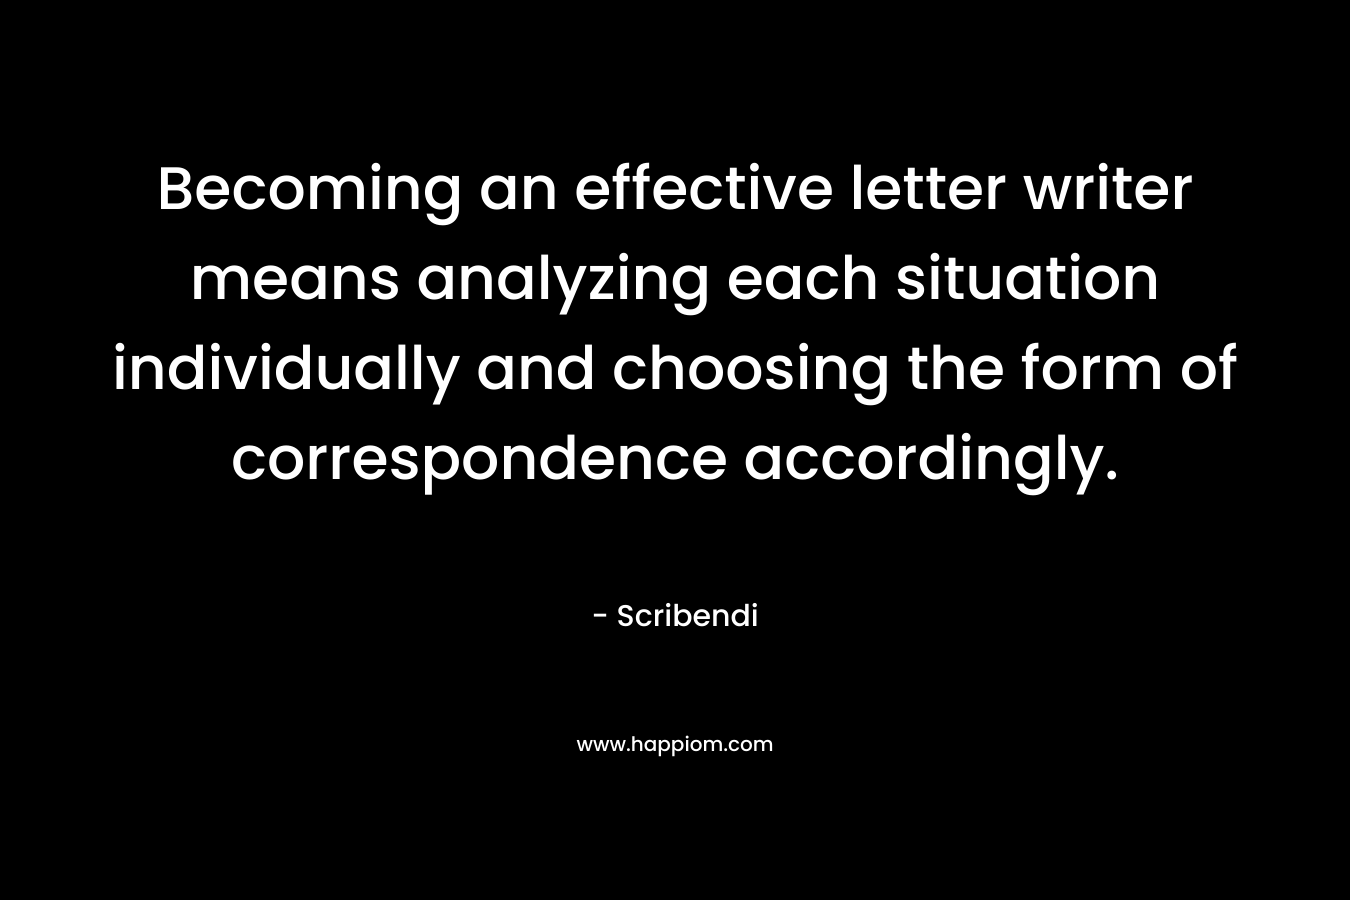 Becoming an effective letter writer means analyzing each situation individually and choosing the form of correspondence accordingly. – Scribendi